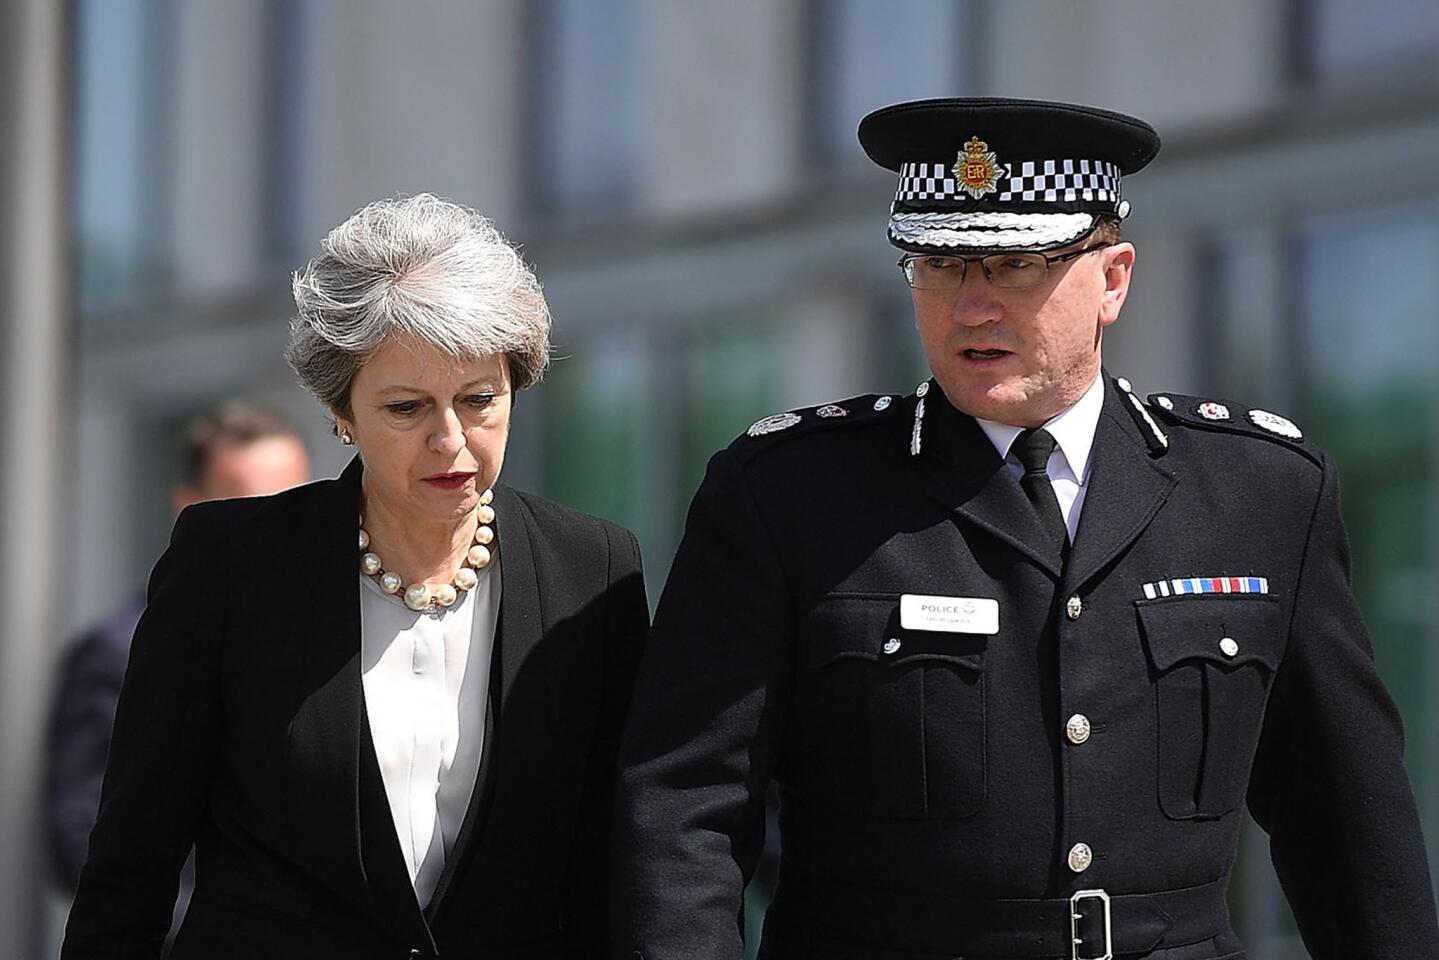 British Prime Minister Theresa May meets Chief Constable of Greater Manchester Police Ian Hopkins on May 23, 2017, in Manchester, the day after a terrorist attack in the city.